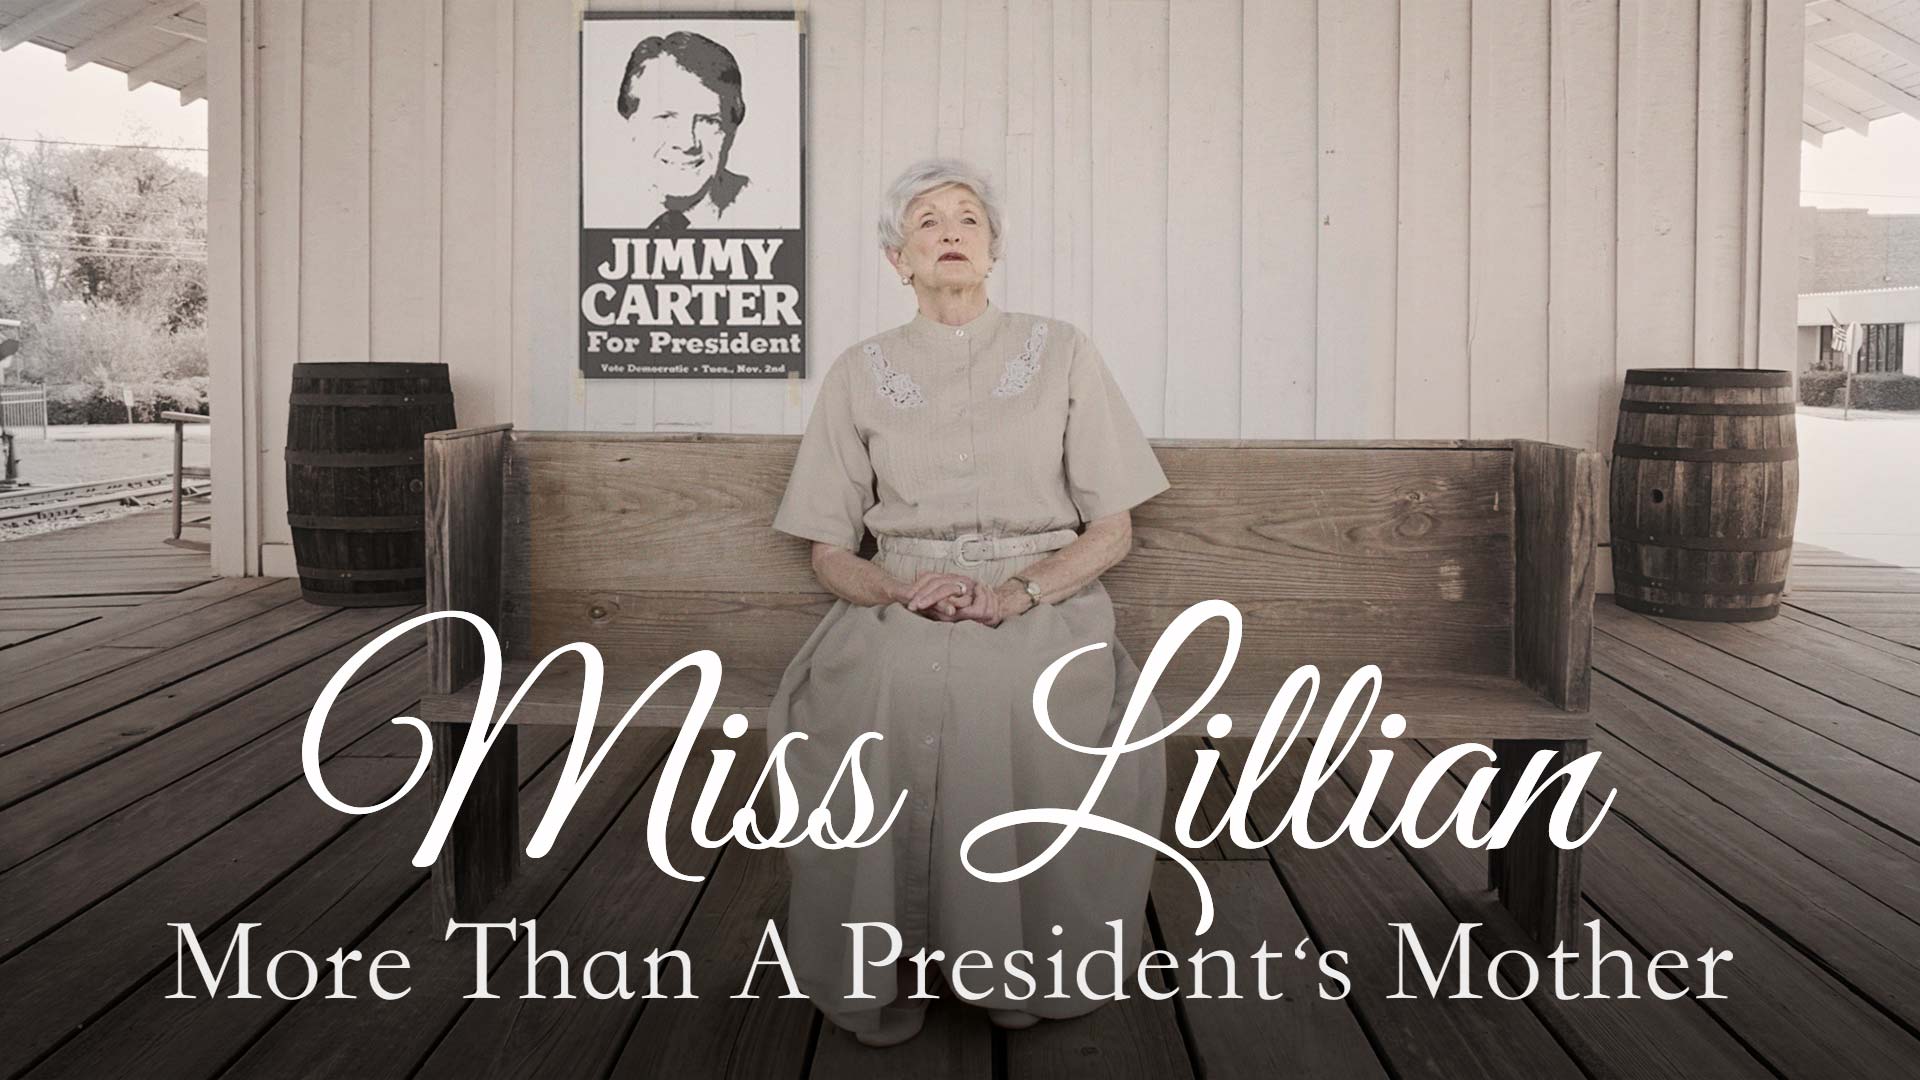 Miss Lillian: More Than A President's Mother Film Trailer